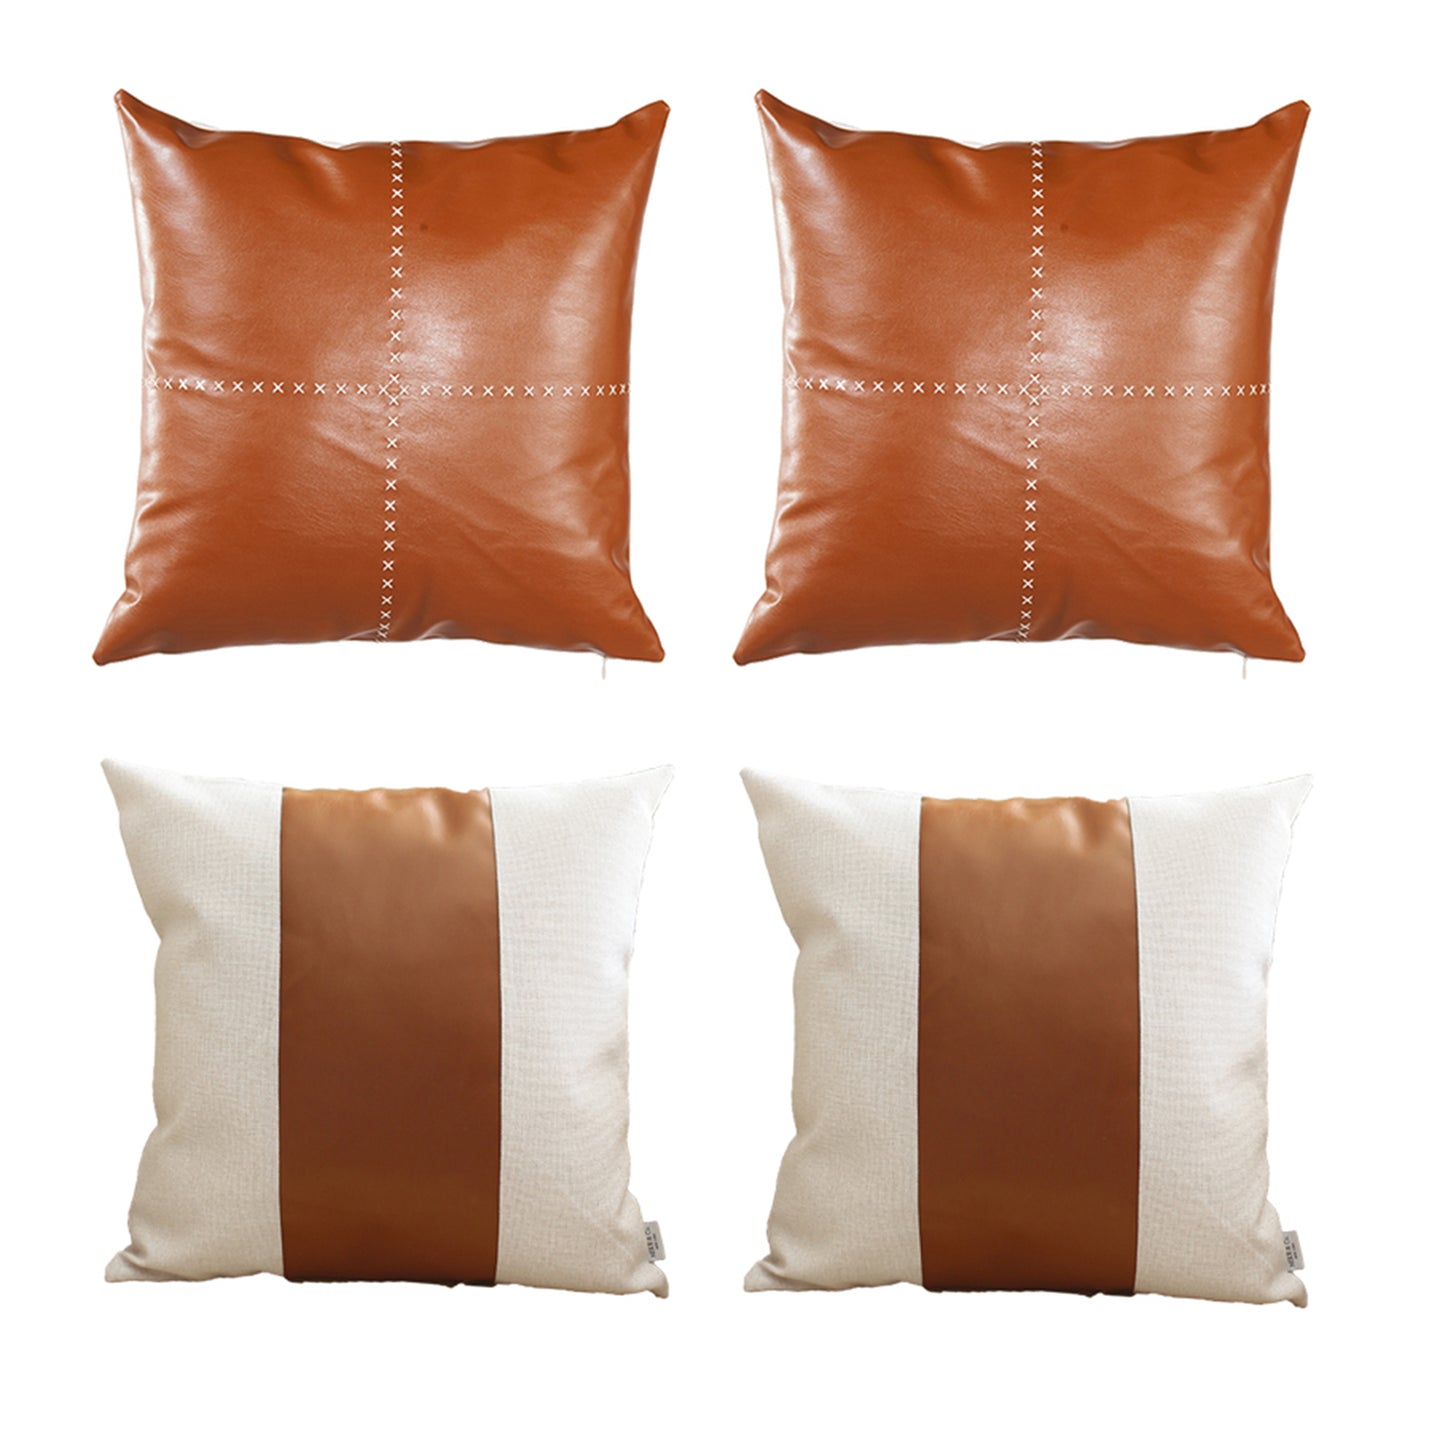 Boho Embroidered Set of 4 Throw Pillow 18" x 18" Vegan Faux Leather Solid Beige & Brown Square for Couch, Bedding